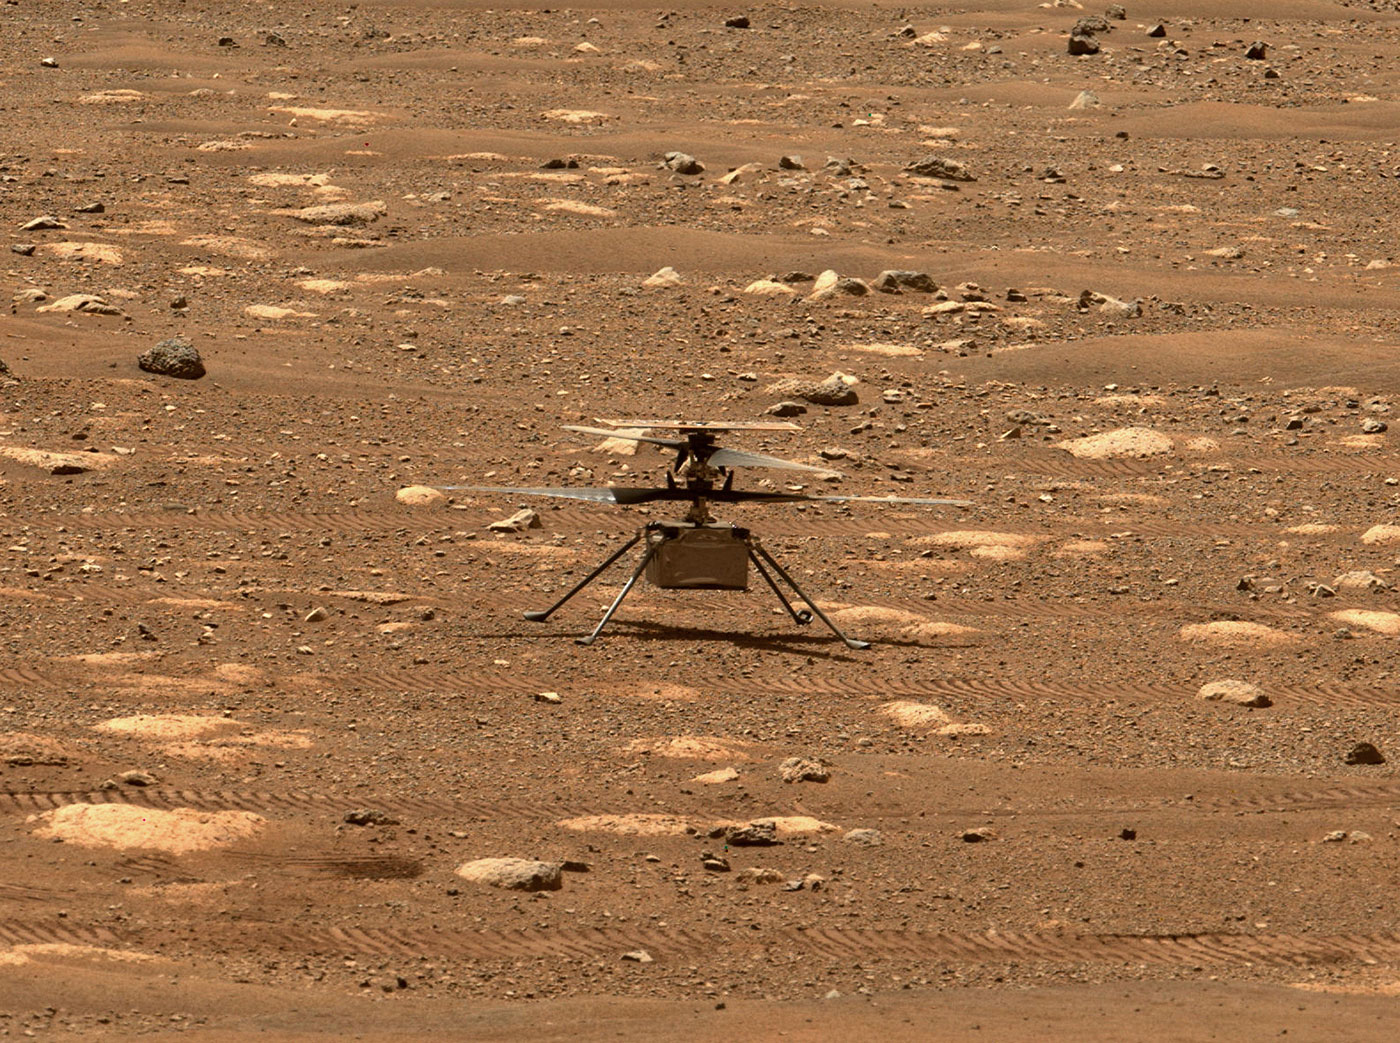 NASA’s Ingenuity helicopter unlocked its blades